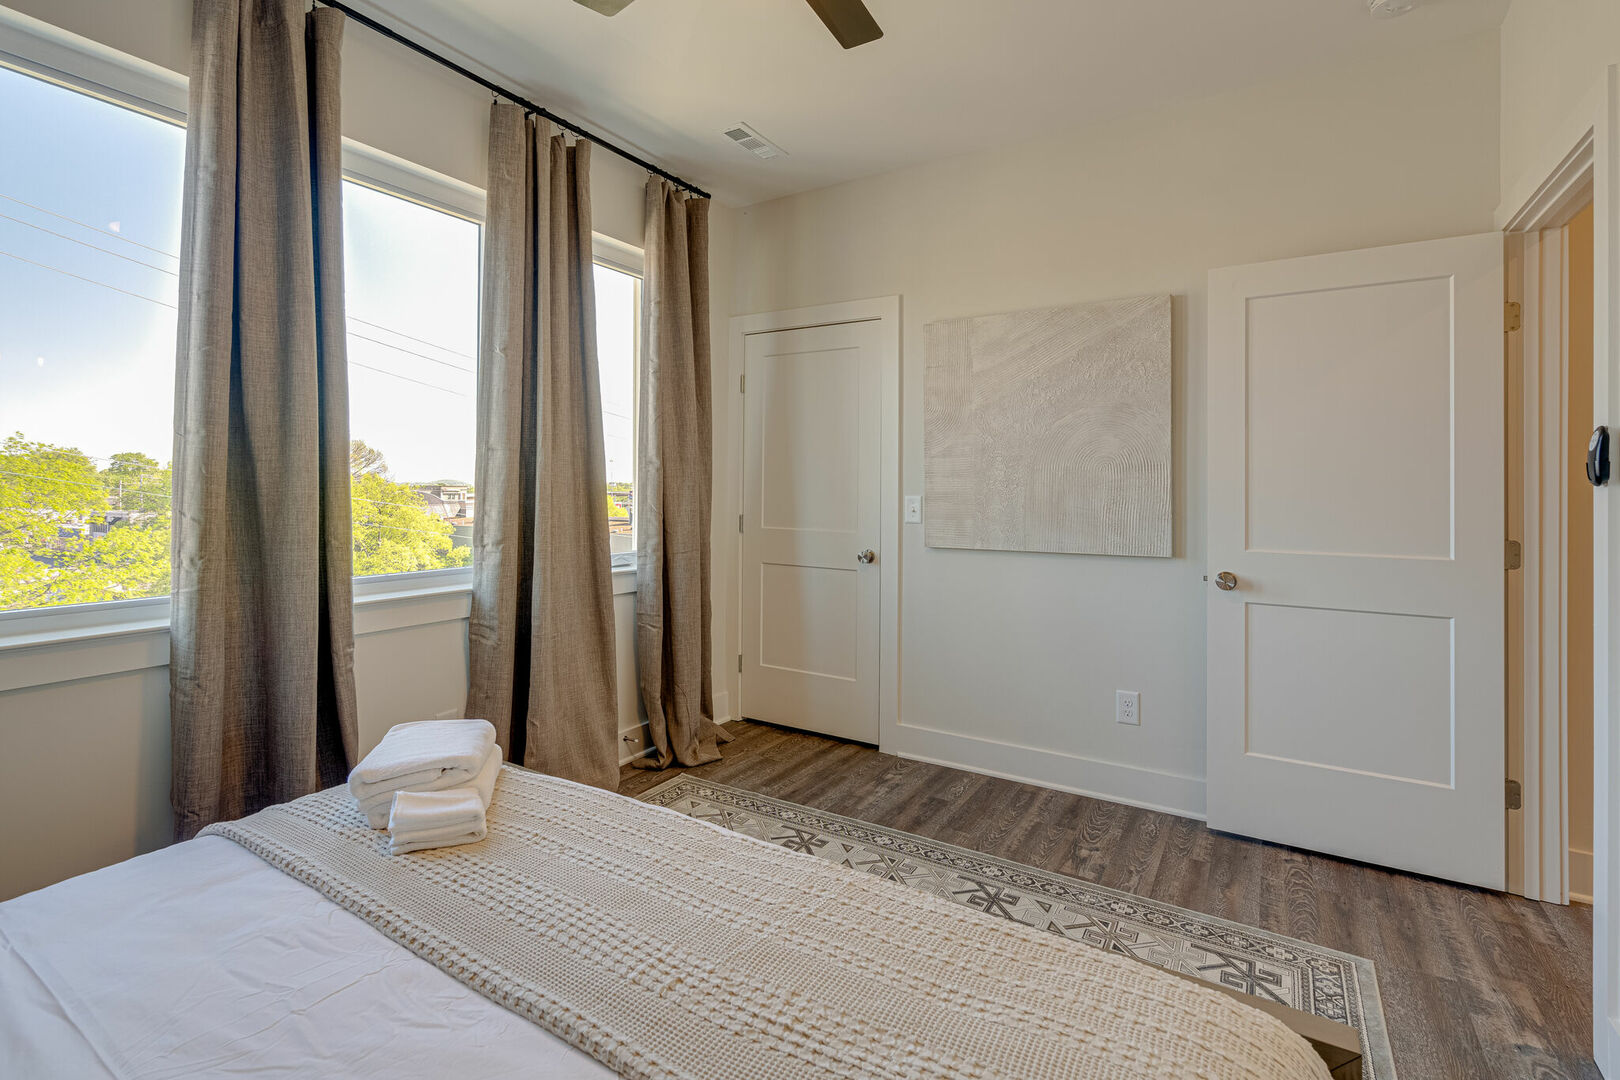 3rd floor: 2nd Bedroom featuring a King bed and designer furnishings with ensuite bathroom.